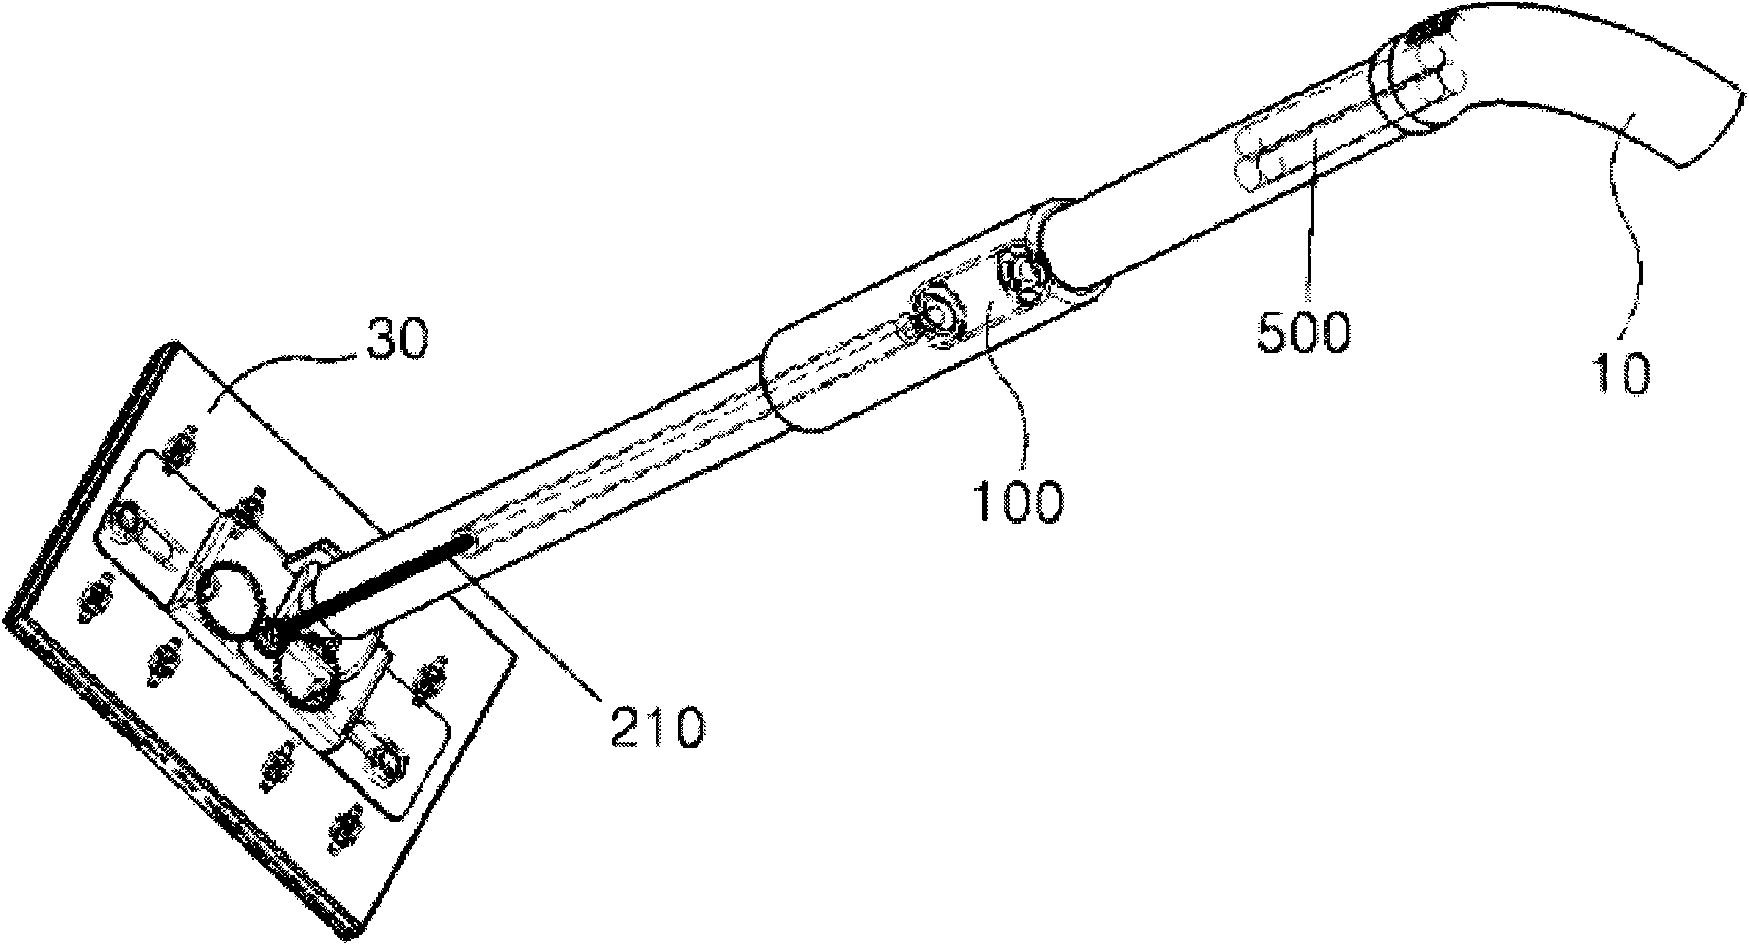 Apparatus for cleaning floor